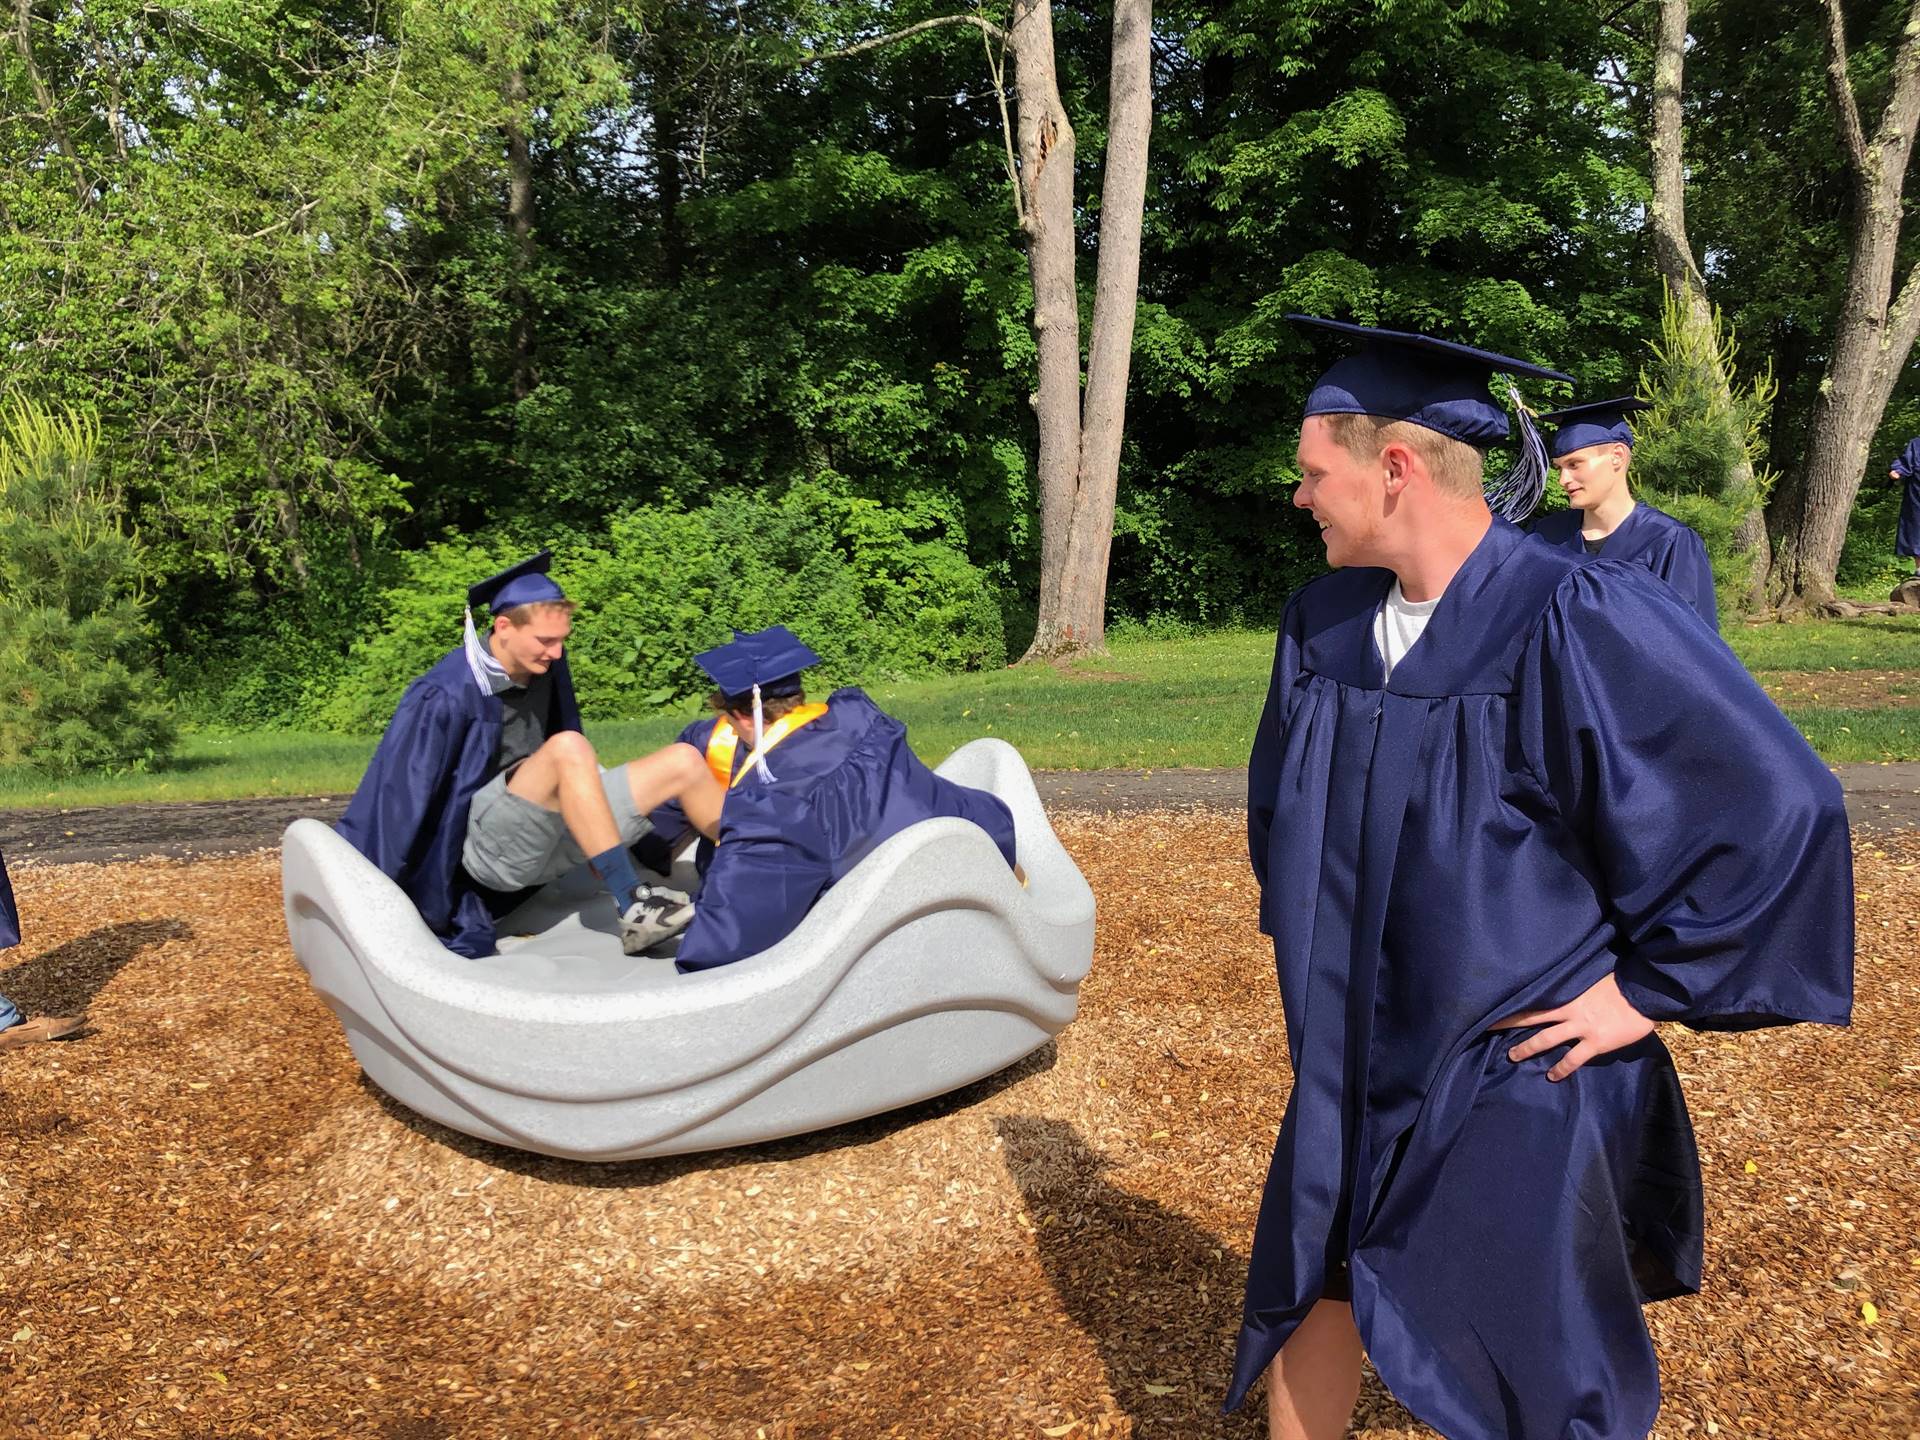 Senior students try out playground.